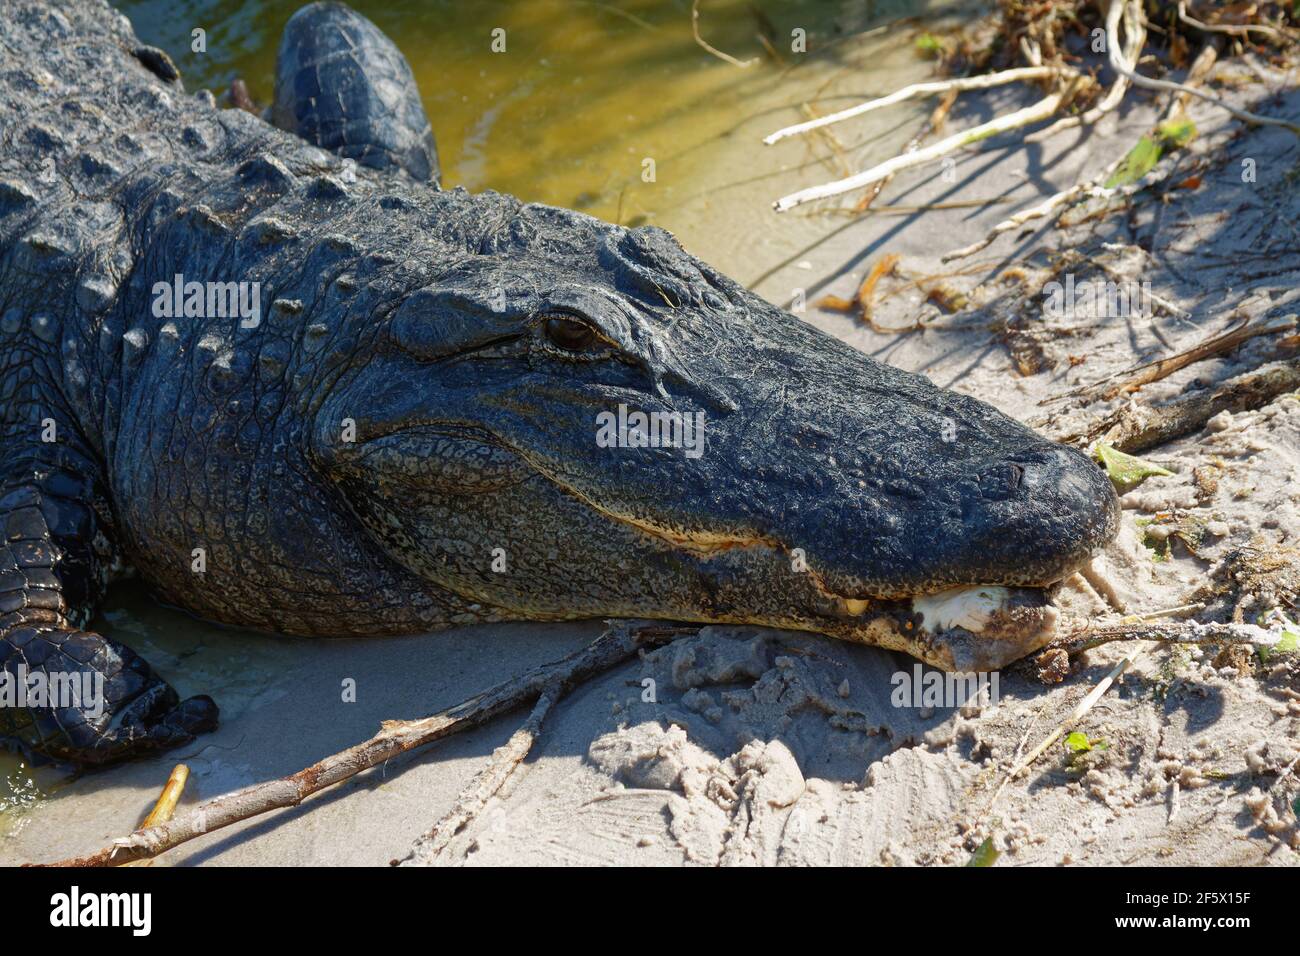 American alligator, malformed mouth and right leg, head on sand, dangerous reptile, animal, wildlife, nature, Alligator mississippiensis, Circle B Bar Stock Photo